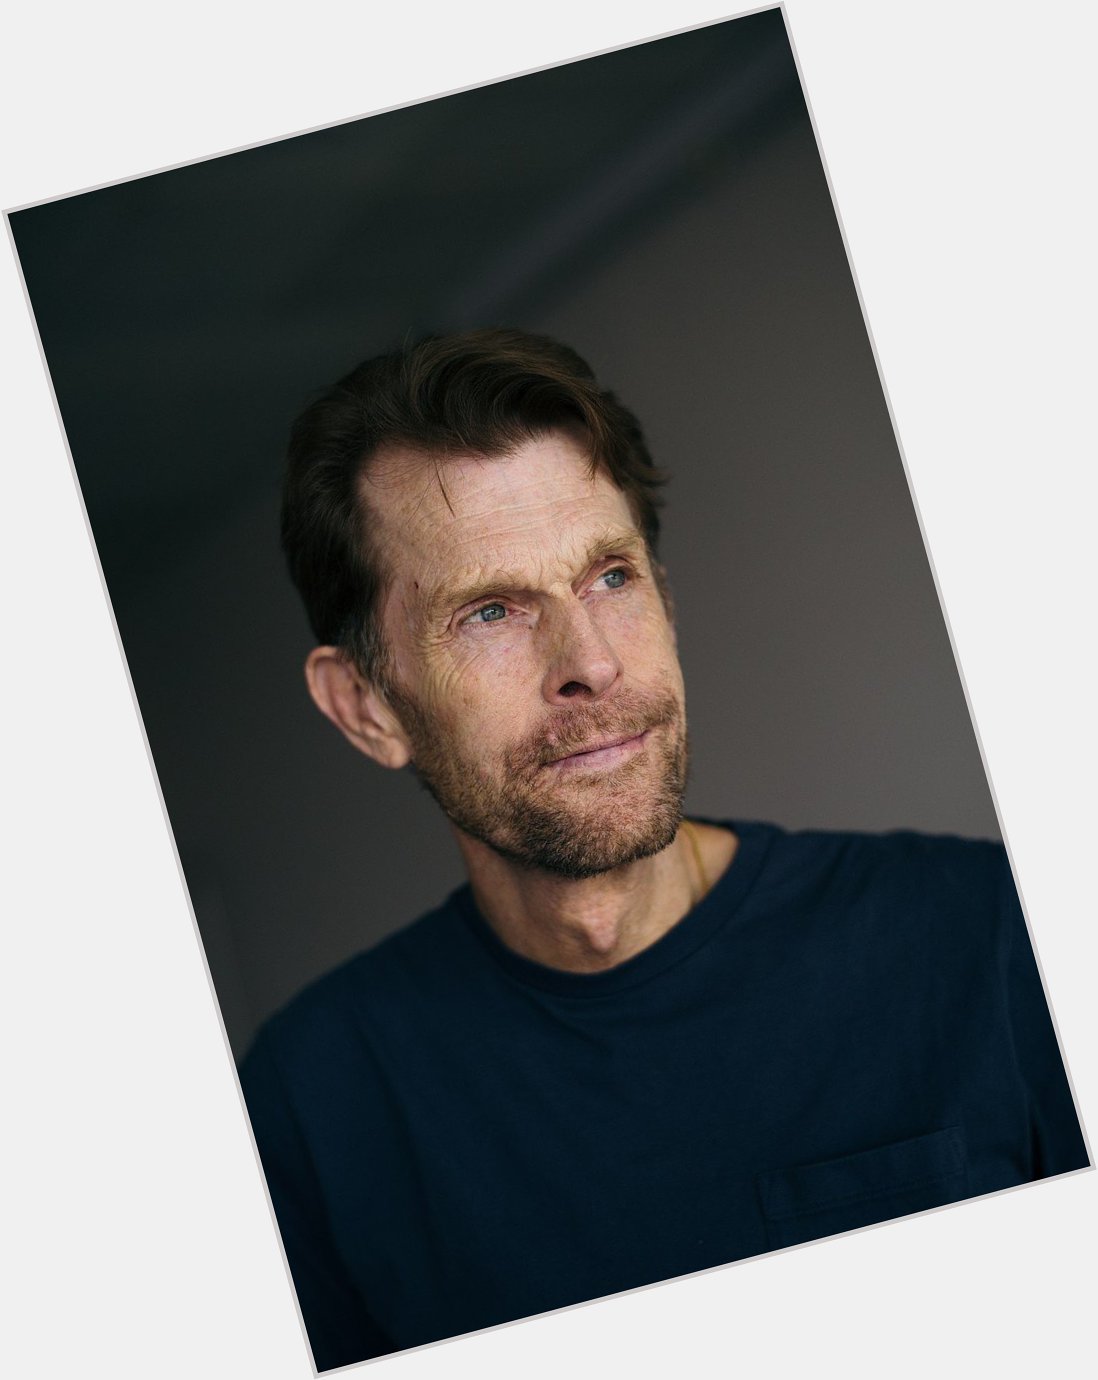 Happy birthday to the one and only Kevin Conroy! The best Batman of all time! 